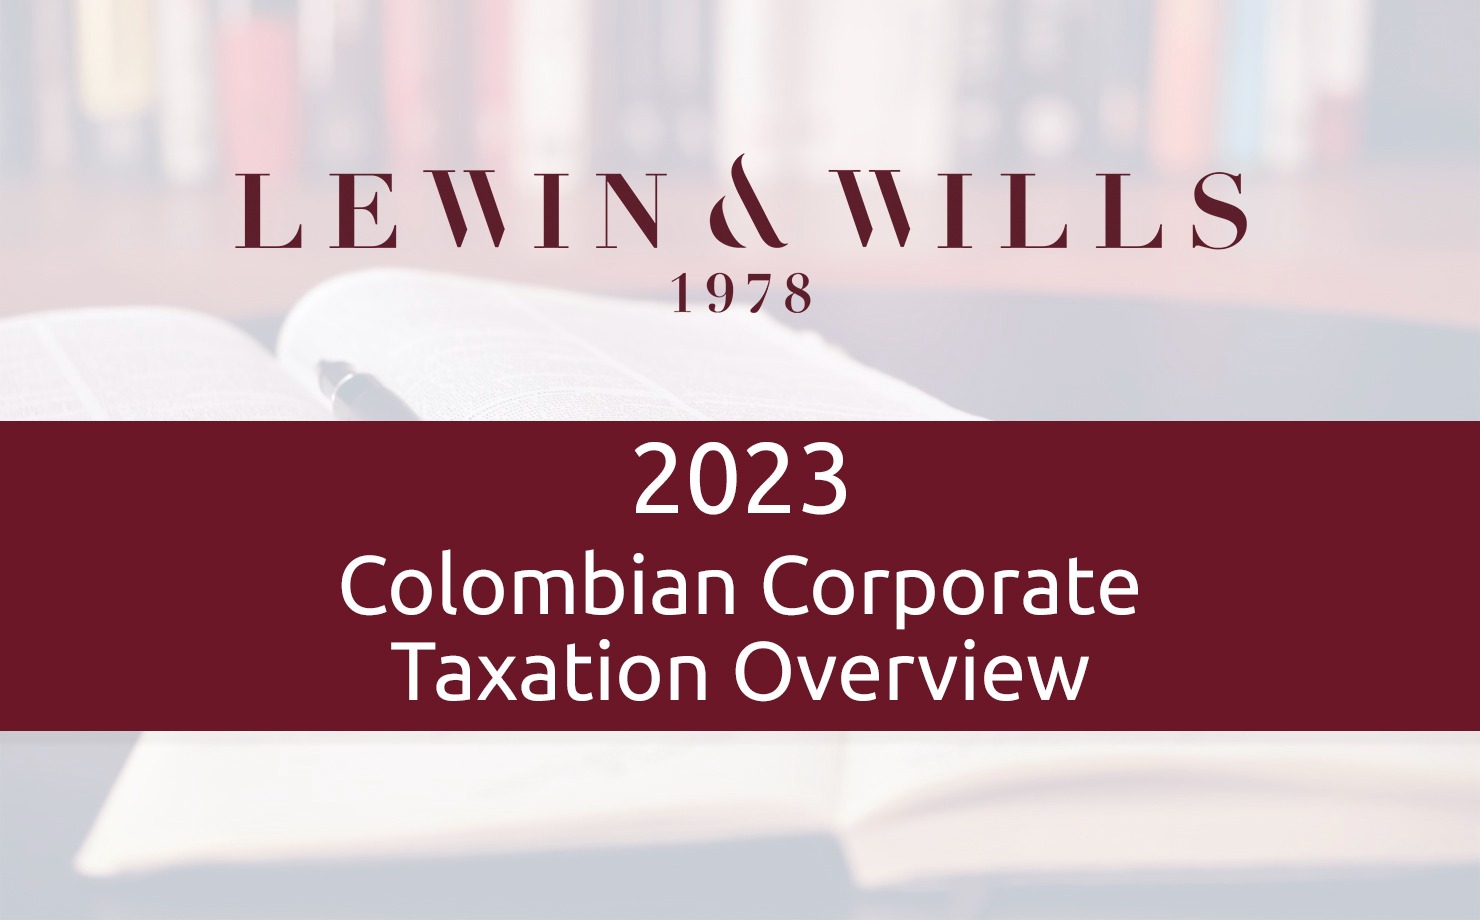 Colombian Corporate Taxation Overview (2023)